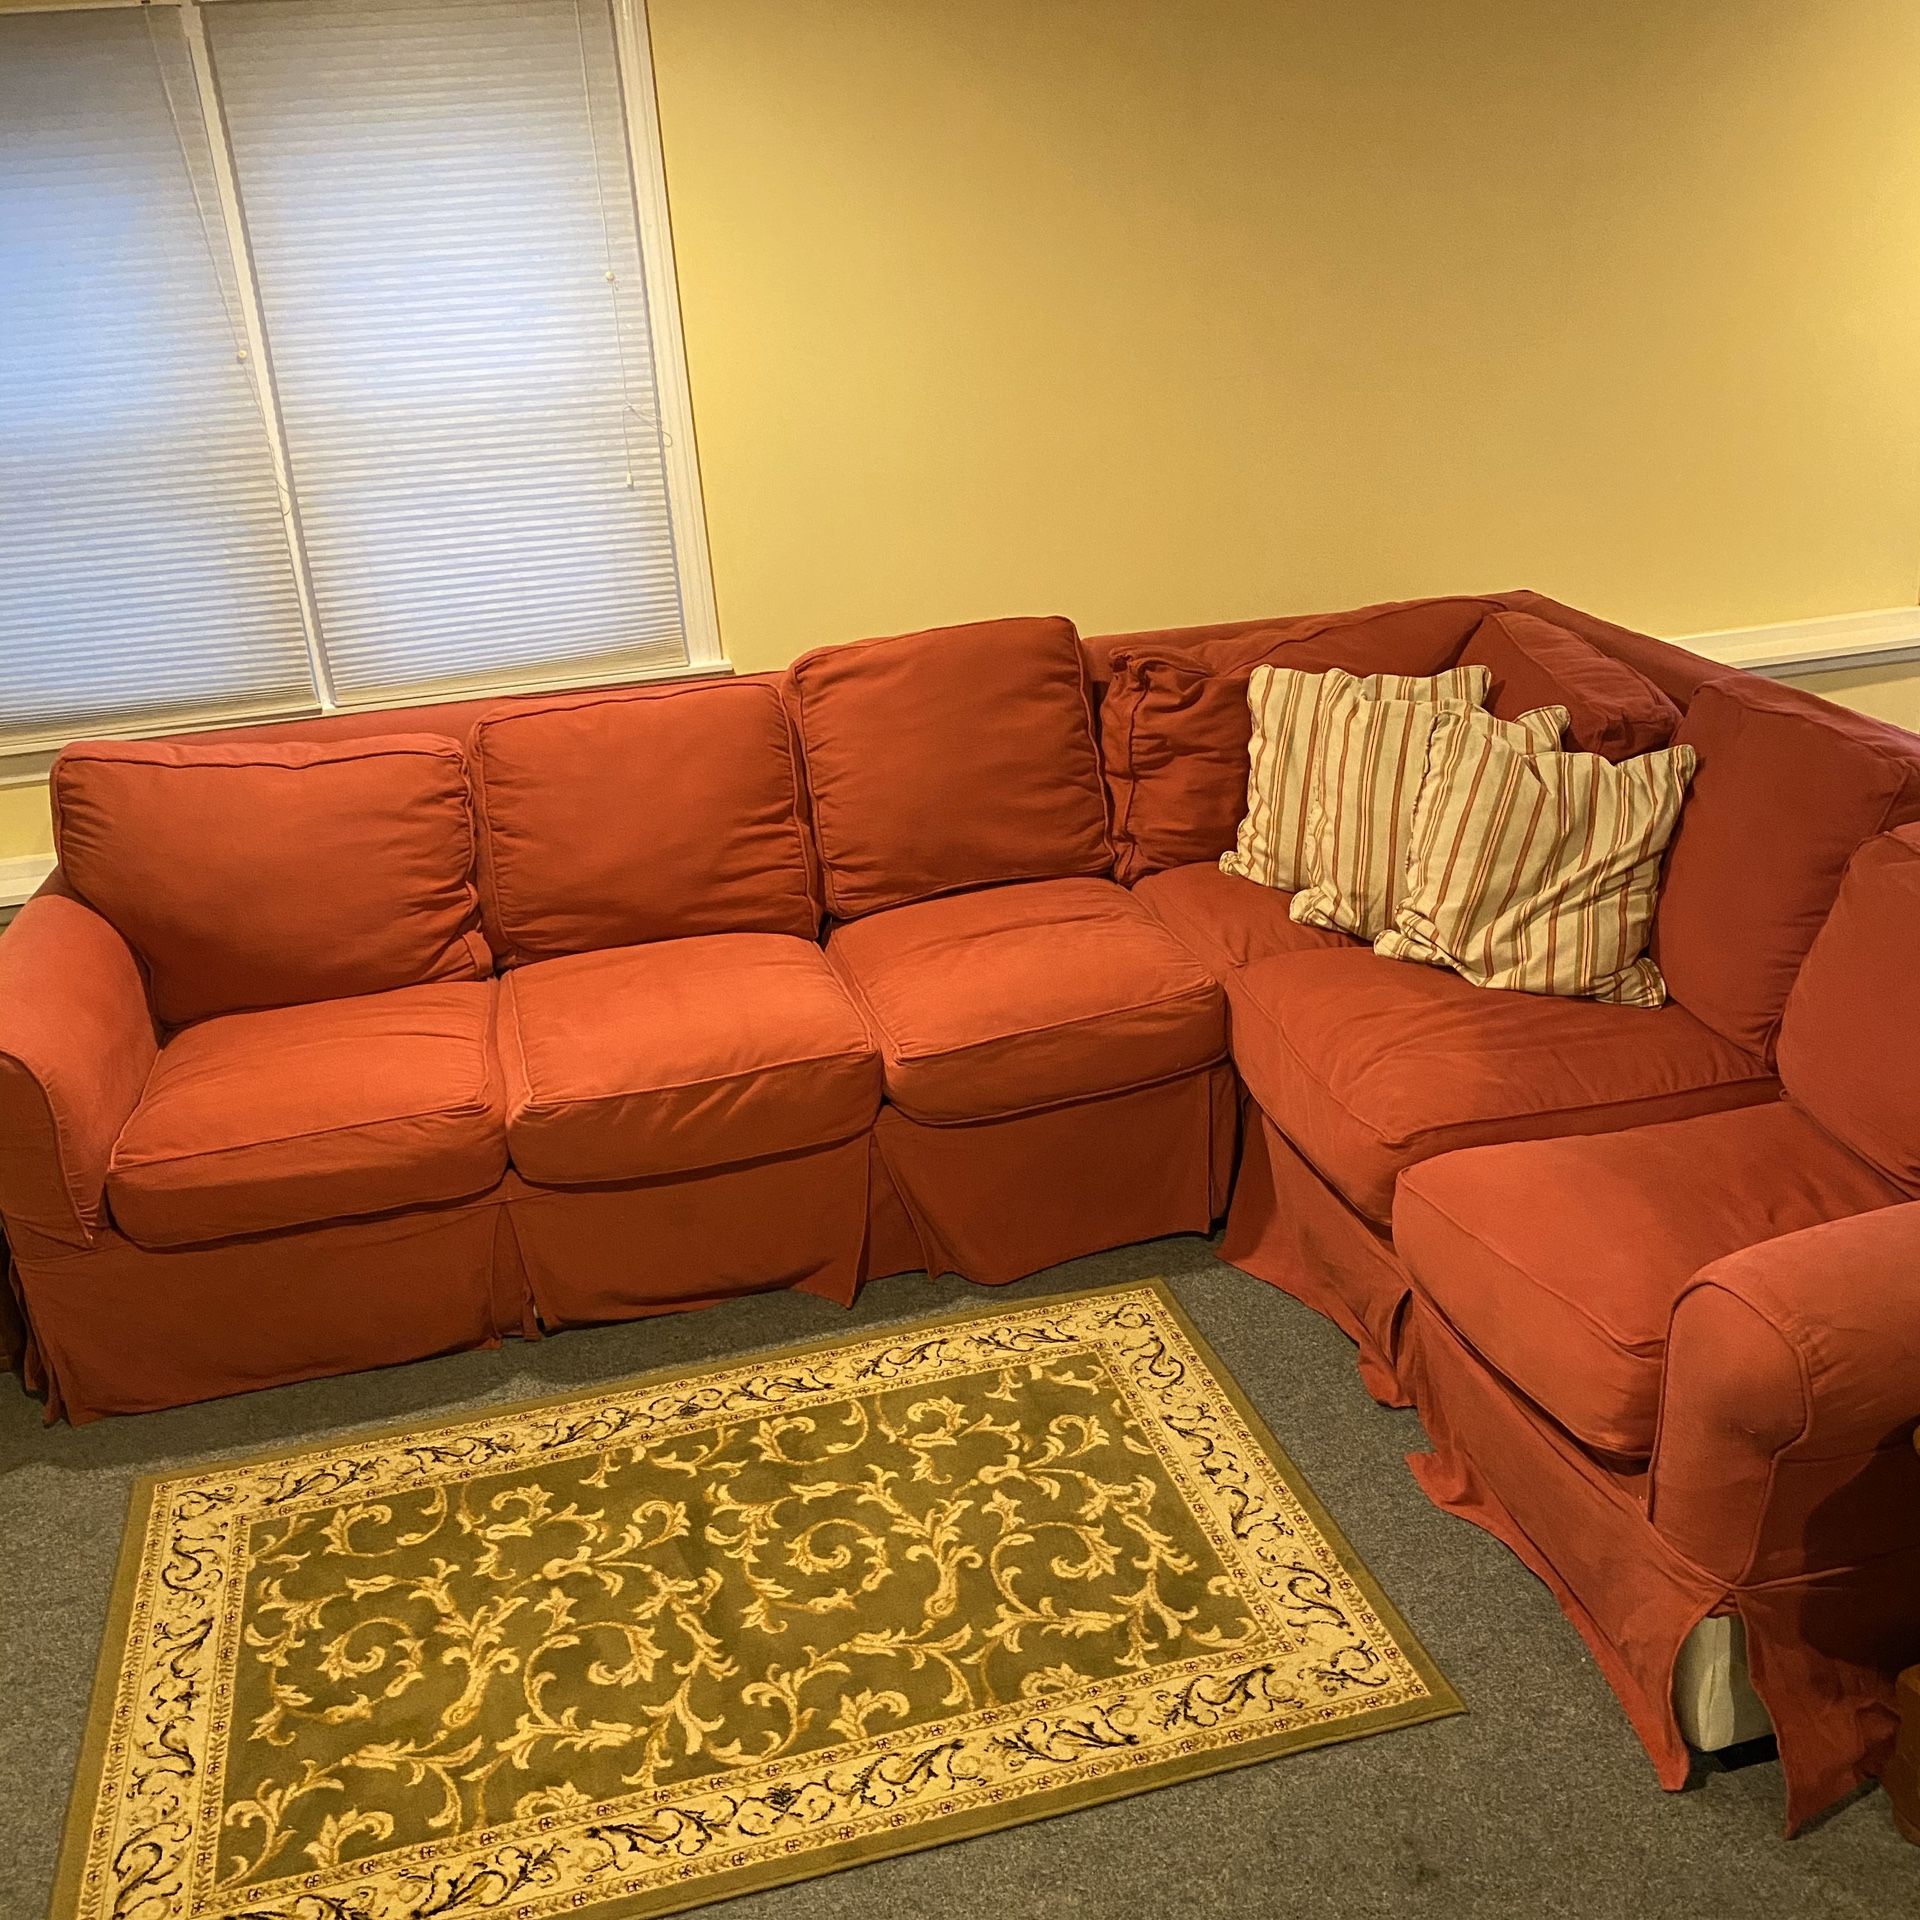 OLDER RED Sectional Couch